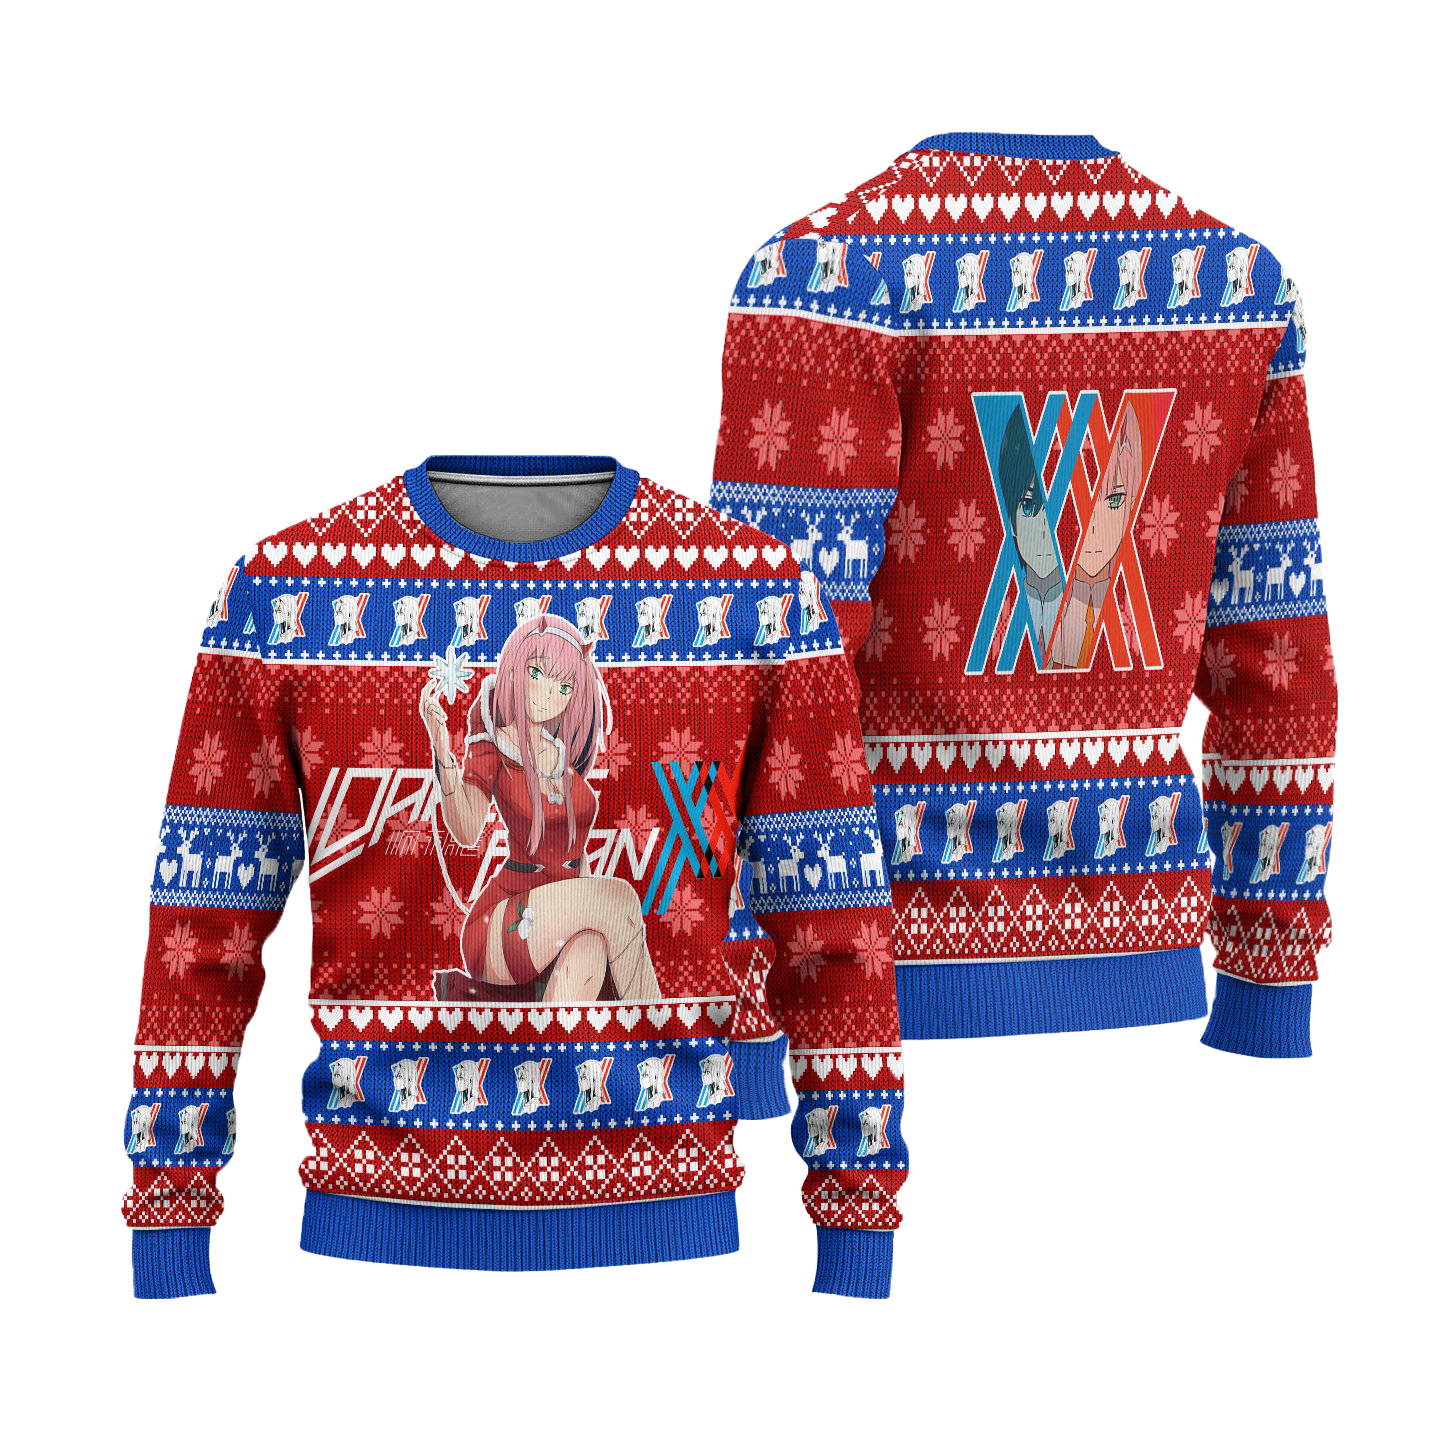 Zero Two Anime Ugly Christmas Sweater Custom Darling In The Franxx Xmas Gift